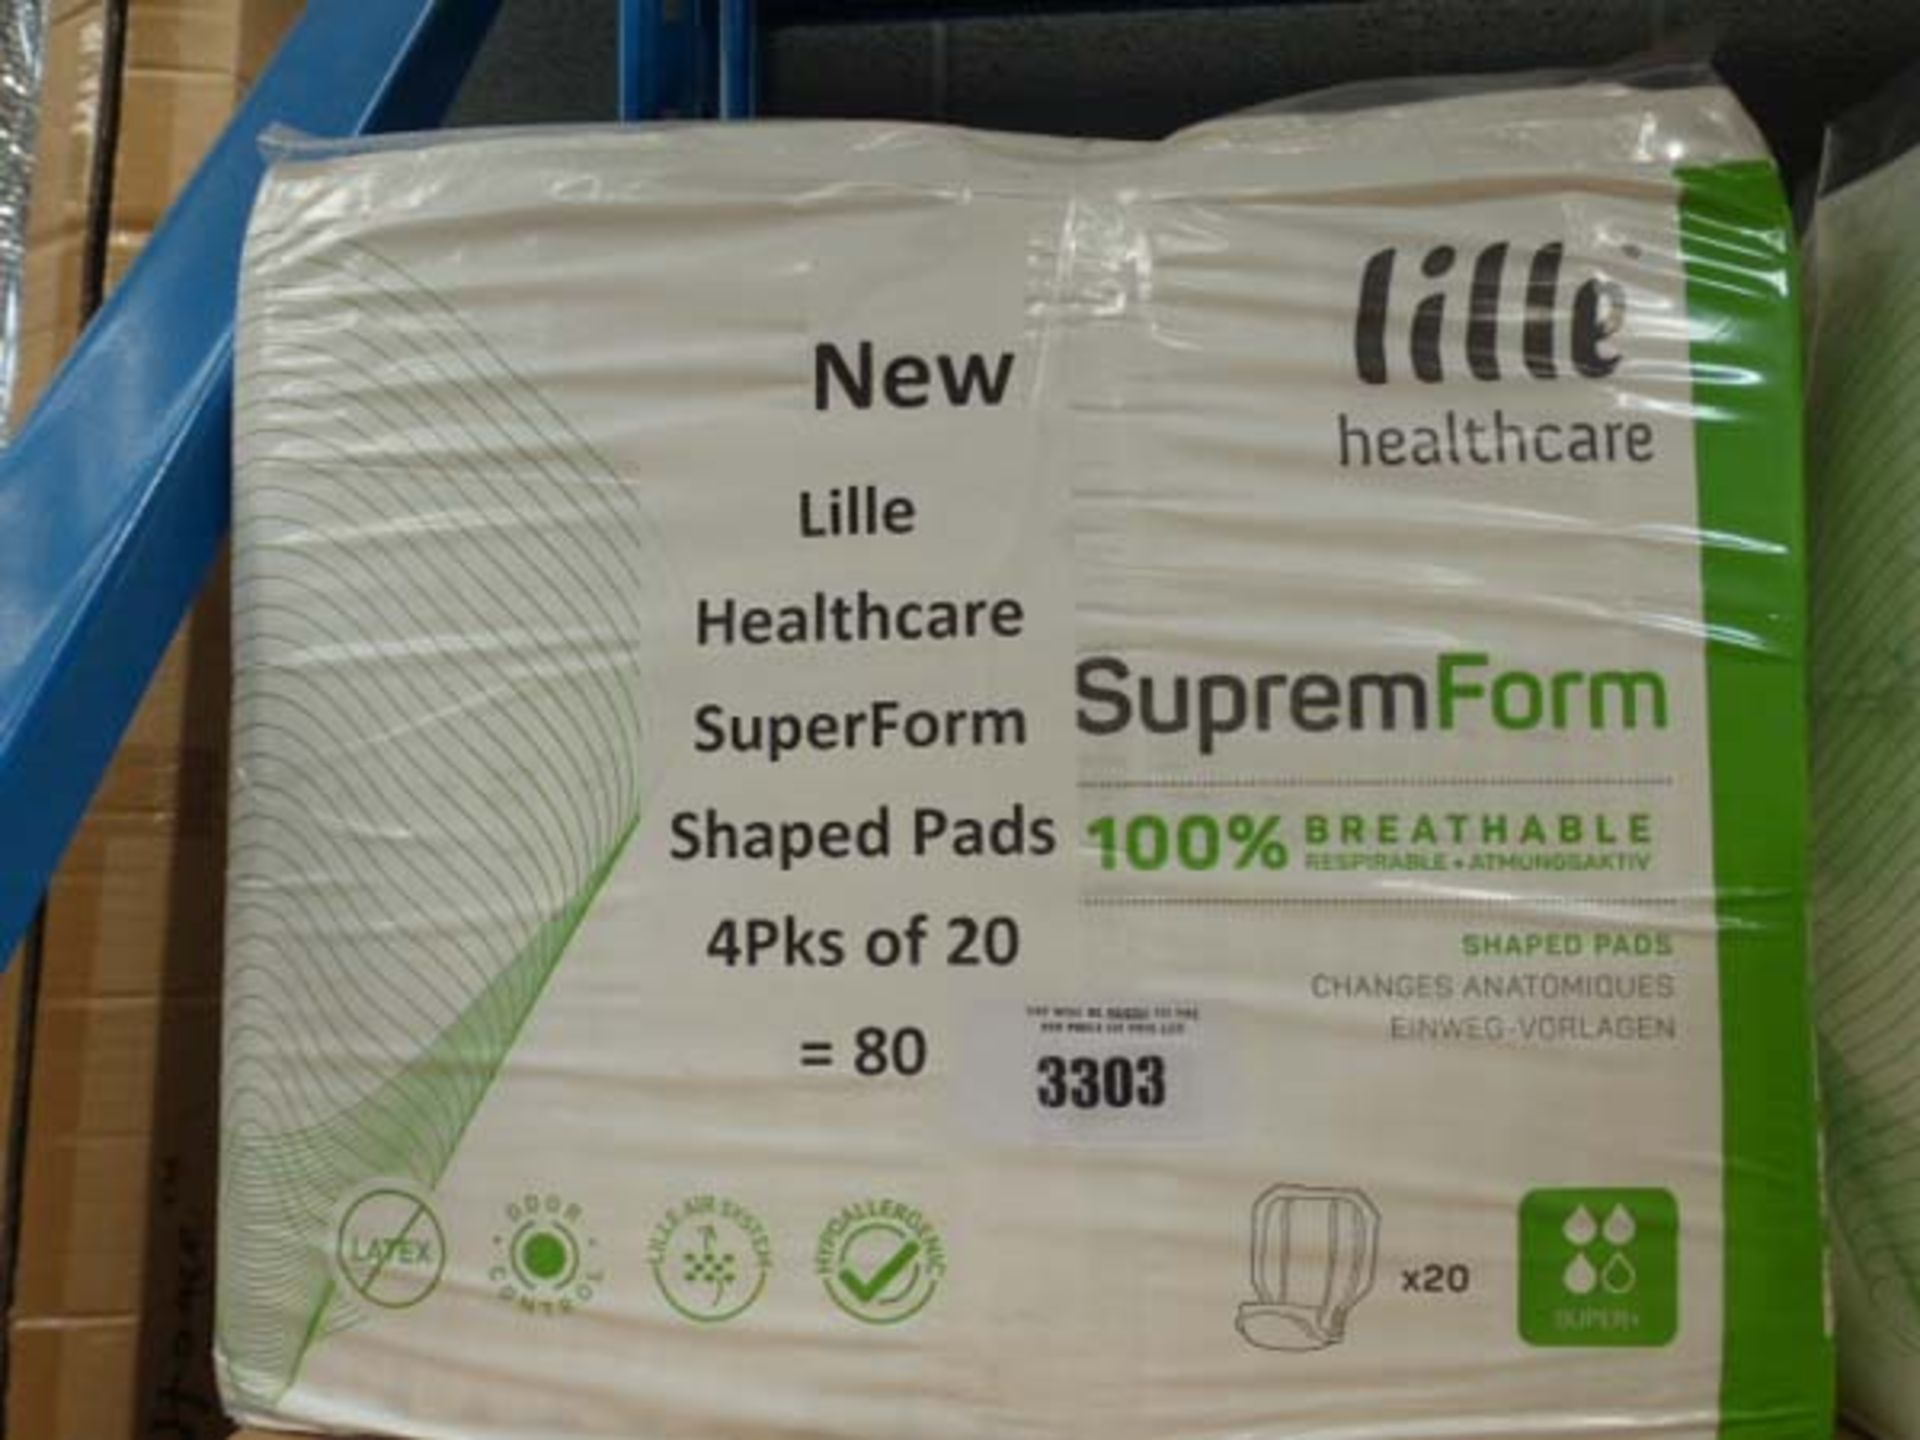 Approx 80 health care support foam pads